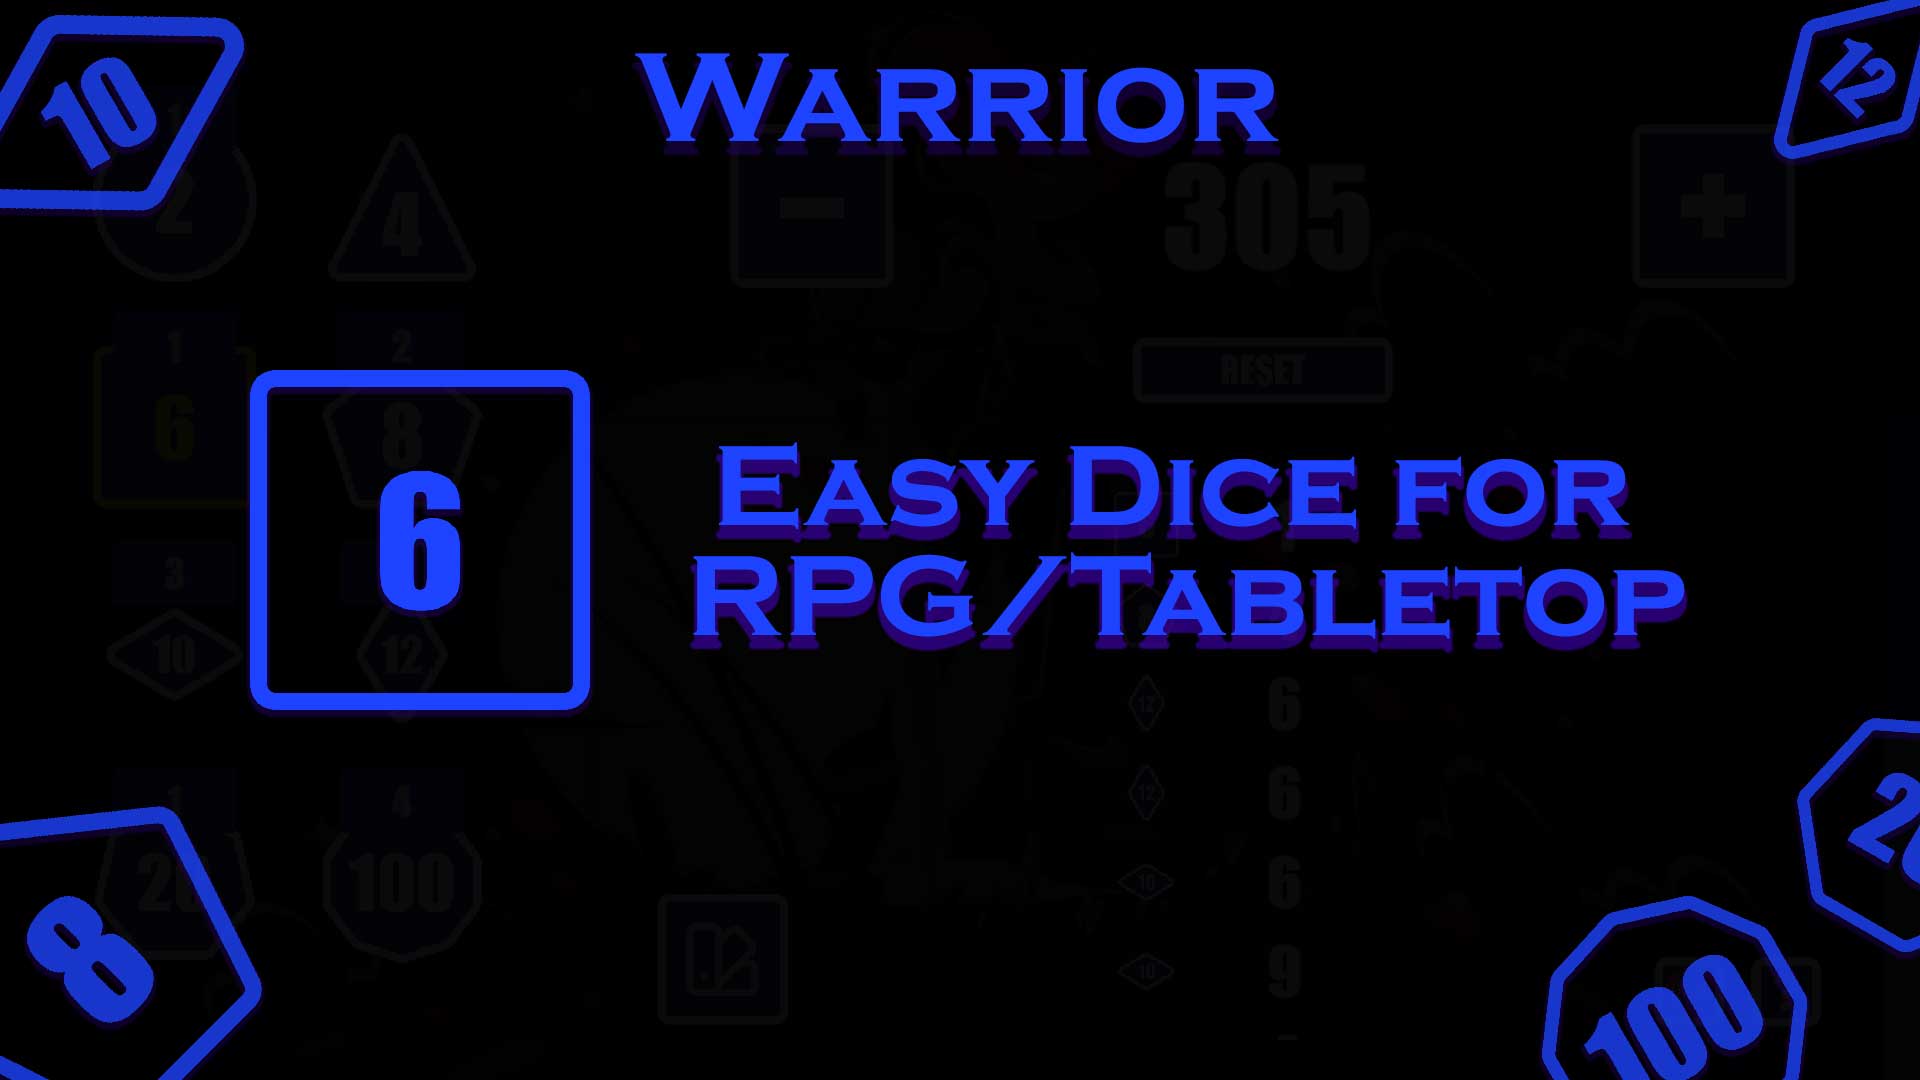 Easy Dice for RPG/Tabletop - Warrior